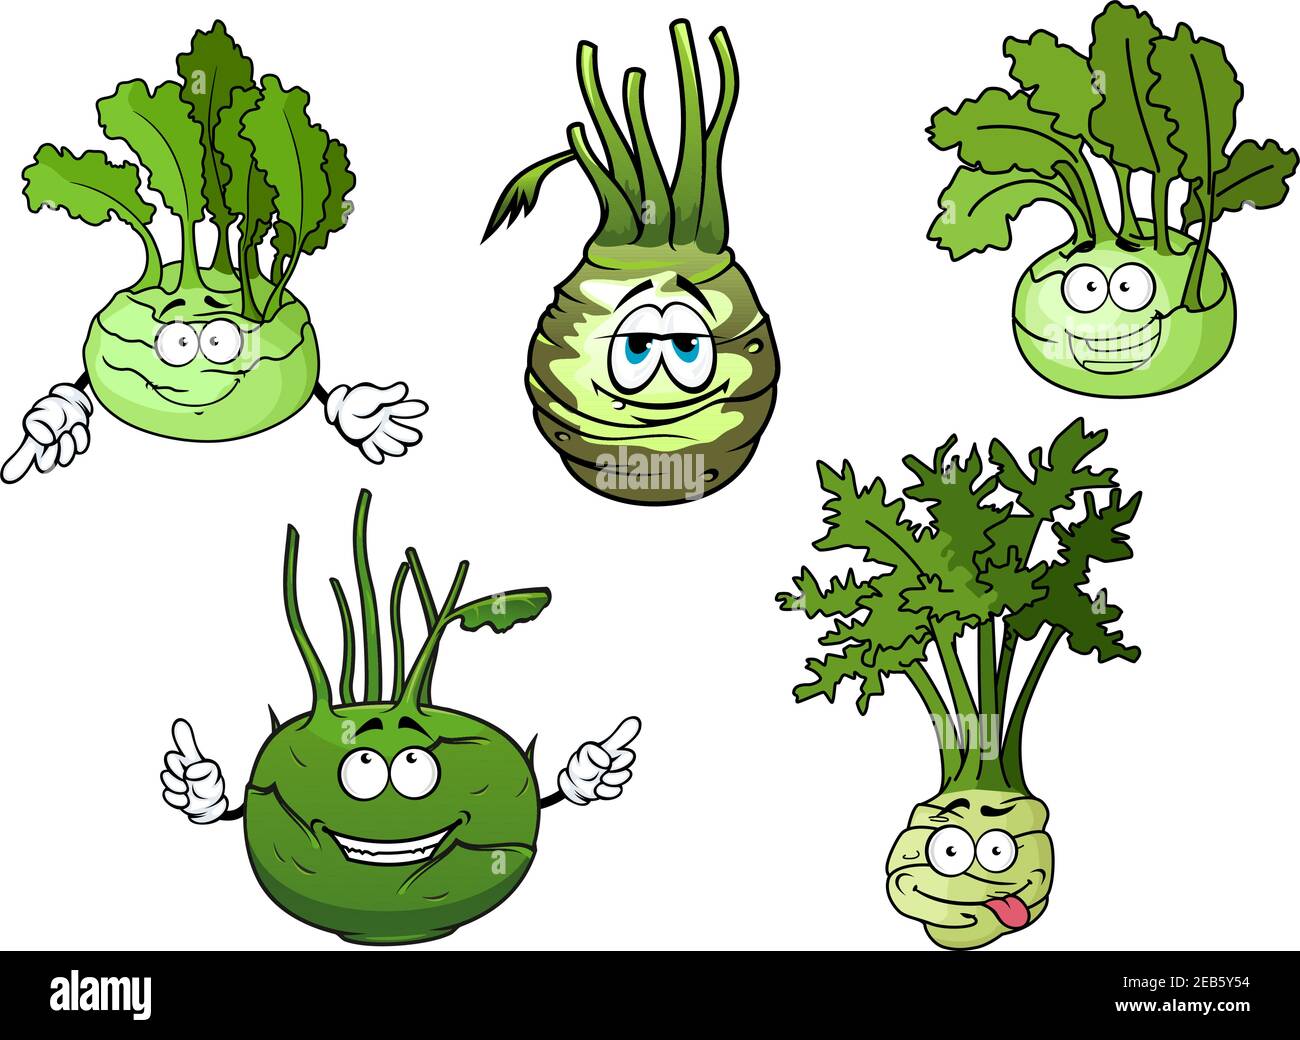 Cartoon funny crunchy kohlrabi cabbages vegetable characters with green rounded heads and fresh leaves. Addition to recipe book, vegetarian menu or ki Stock Vector